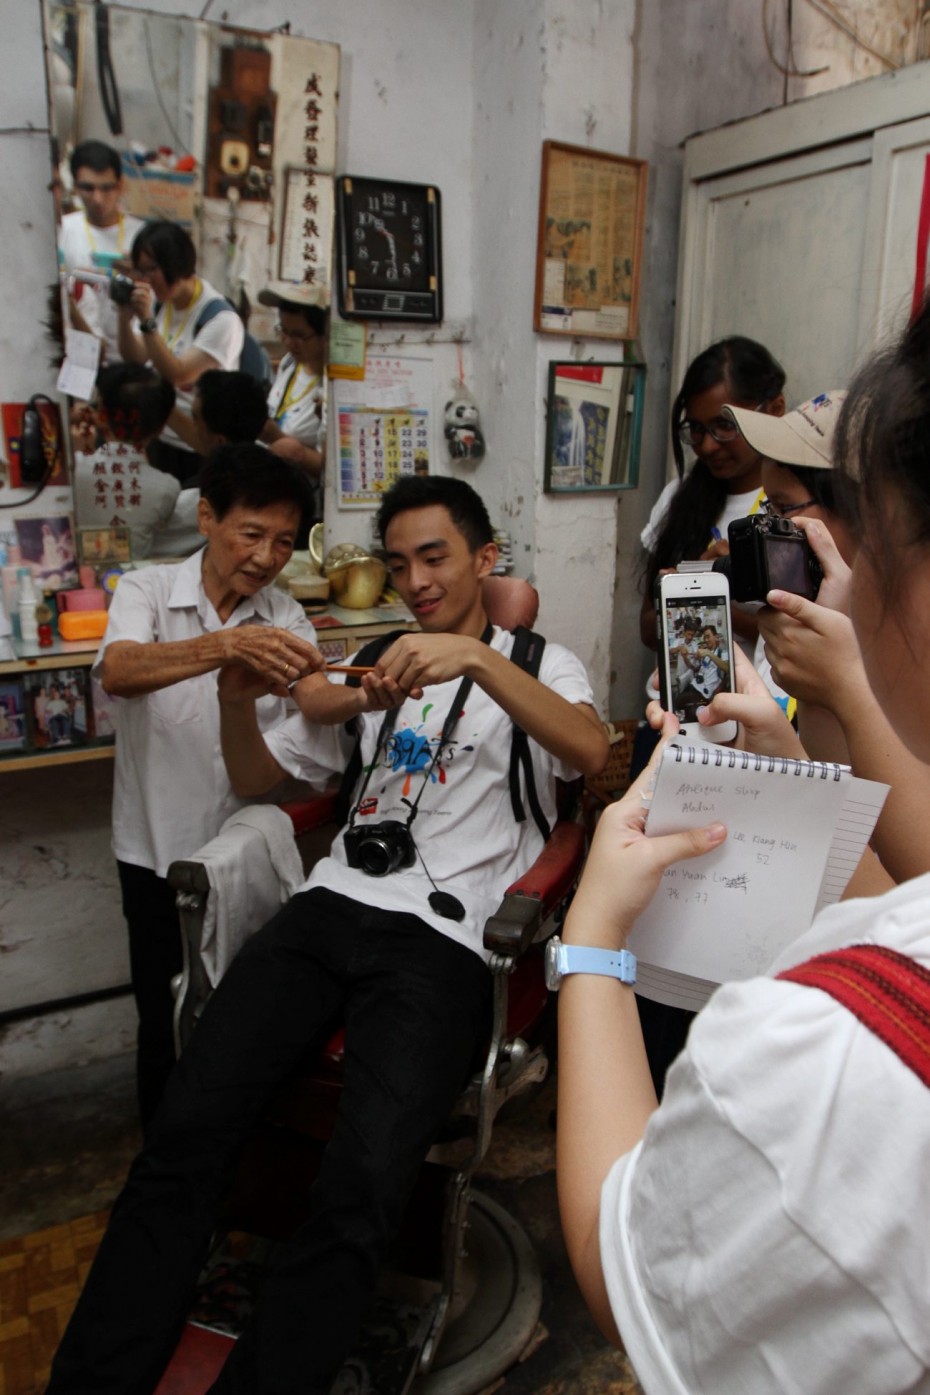 Human history: The BRATs interviewing Soo Xiu Keng, 78, who has run her own tiny barbershop just off Jonker Street for the past 58 years. Soo even let some of the BRATs sit on her barber's chair, which is over 100 years old! Photos by SAMUEL ONG/The Star